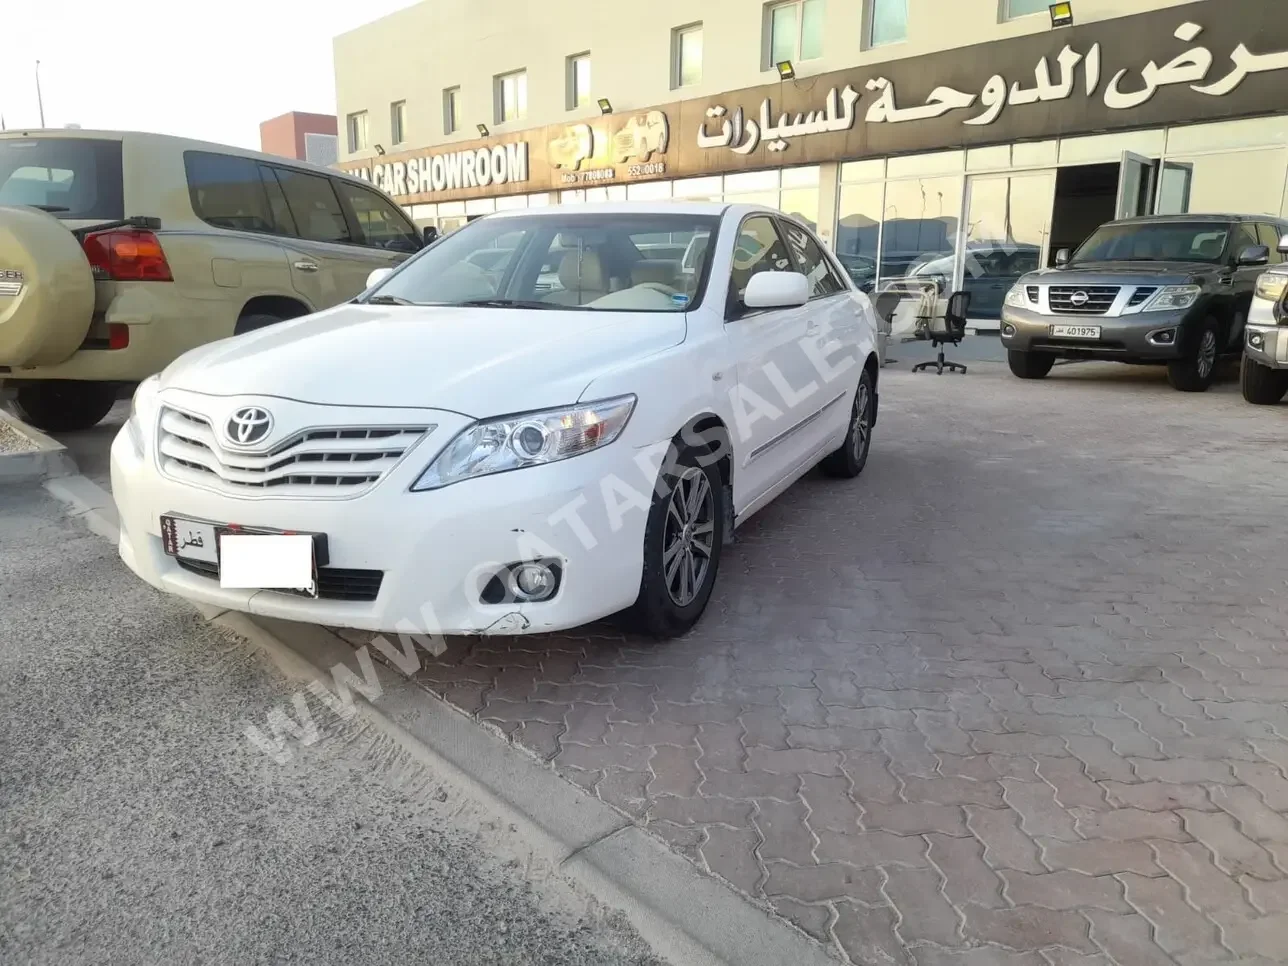 Toyota  Camry  GL  2011  Automatic  162,000 Km  4 Cylinder  Front Wheel Drive (FWD)  Sedan  White